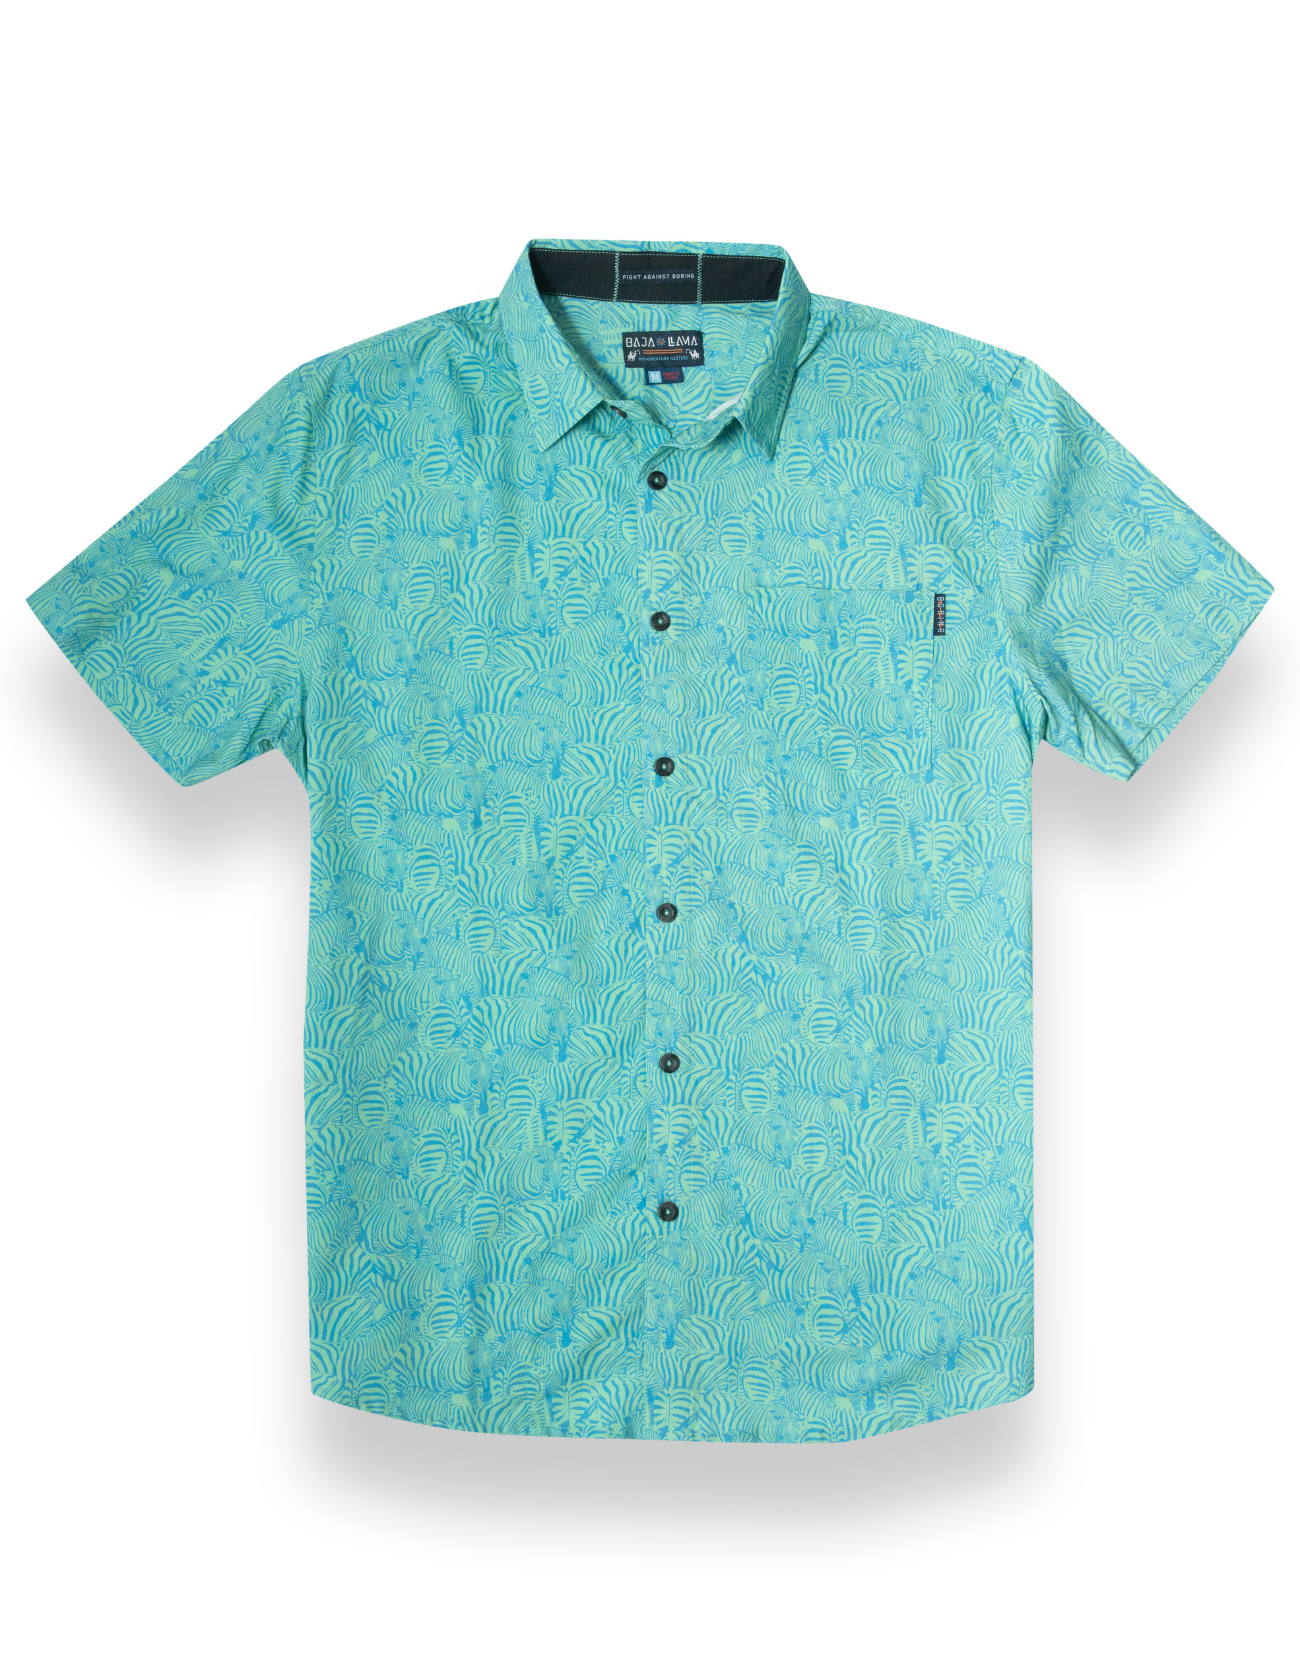 TOO MANY LINES - TURQUOISE ZEBRA  7-SEAS™ BUTTON UP by Bajallama